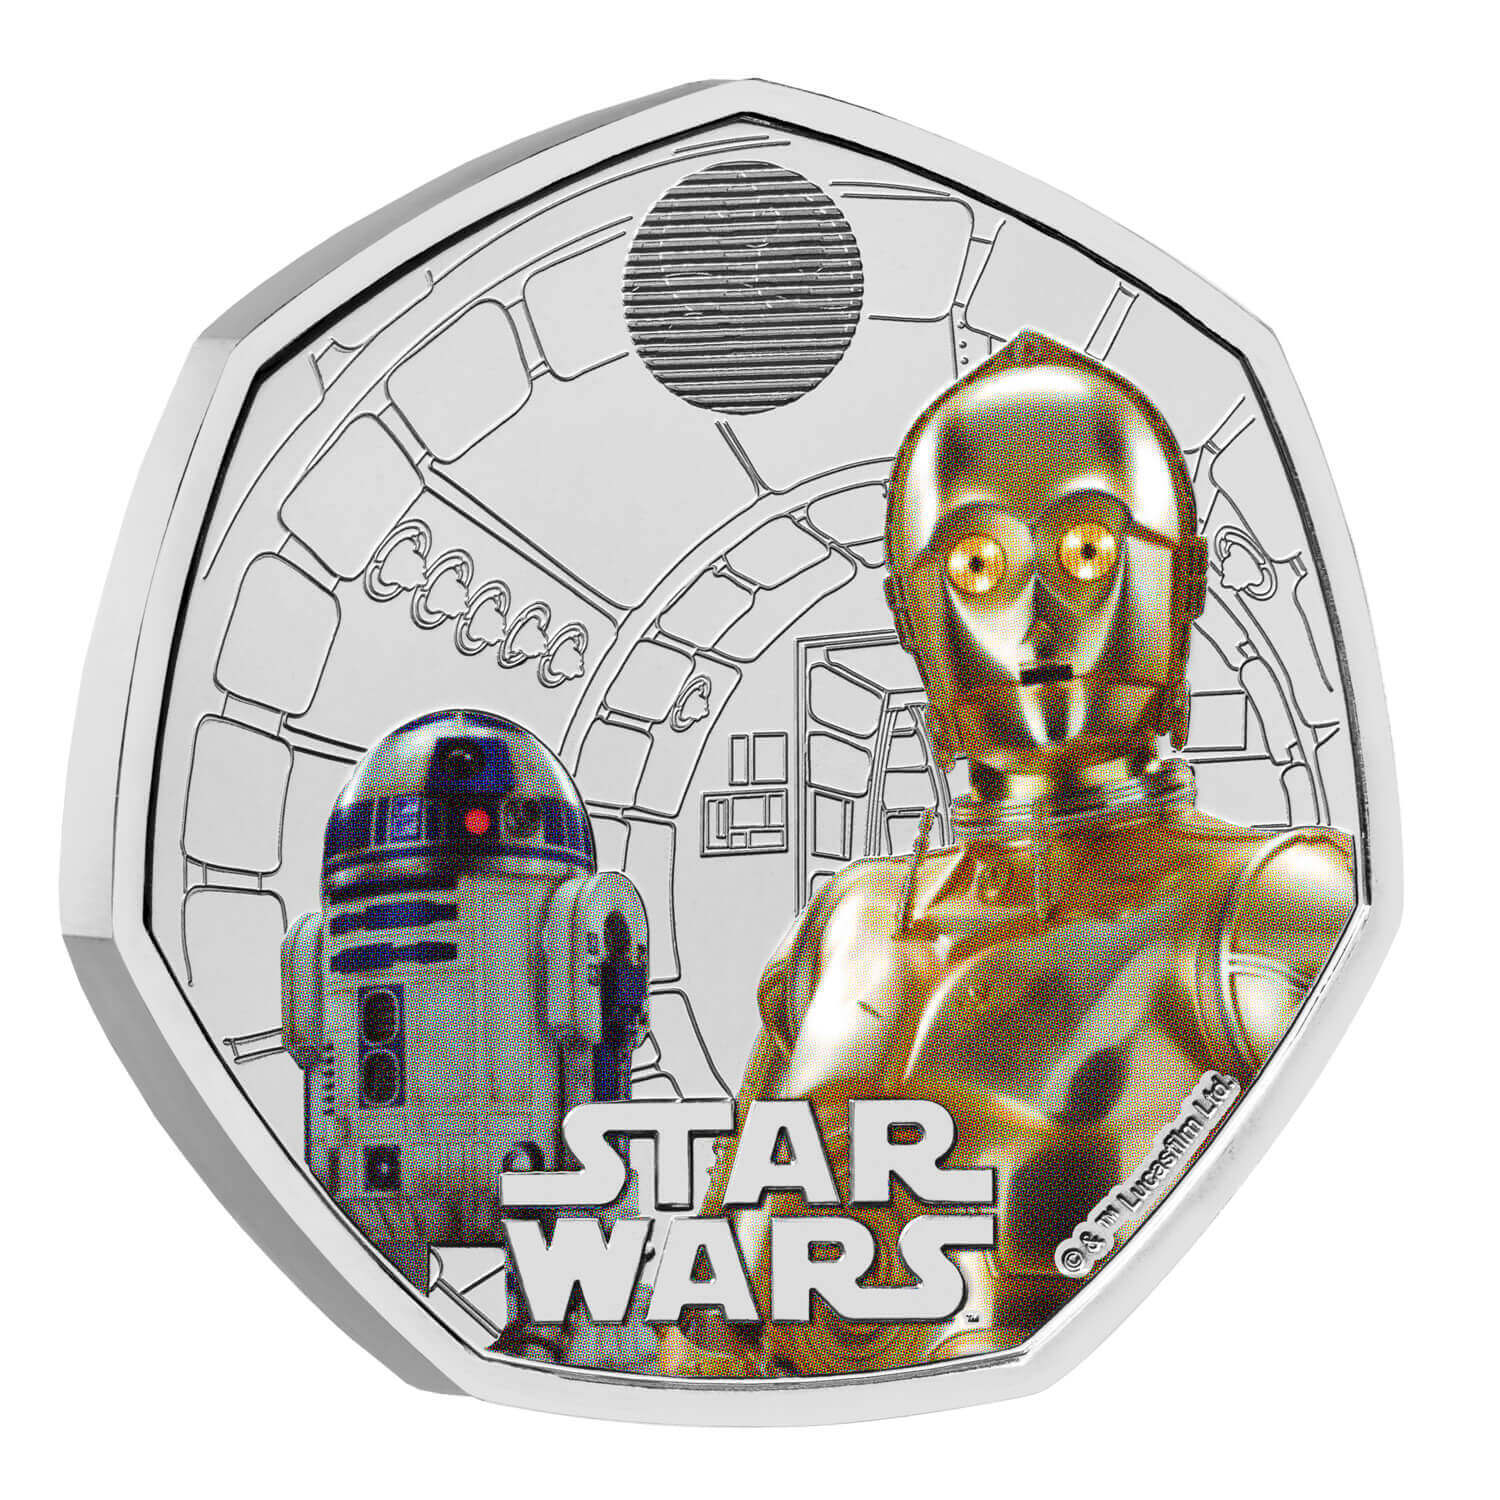 Complete 50p Star Wars Four Coin Set Coloured BUNC Combo